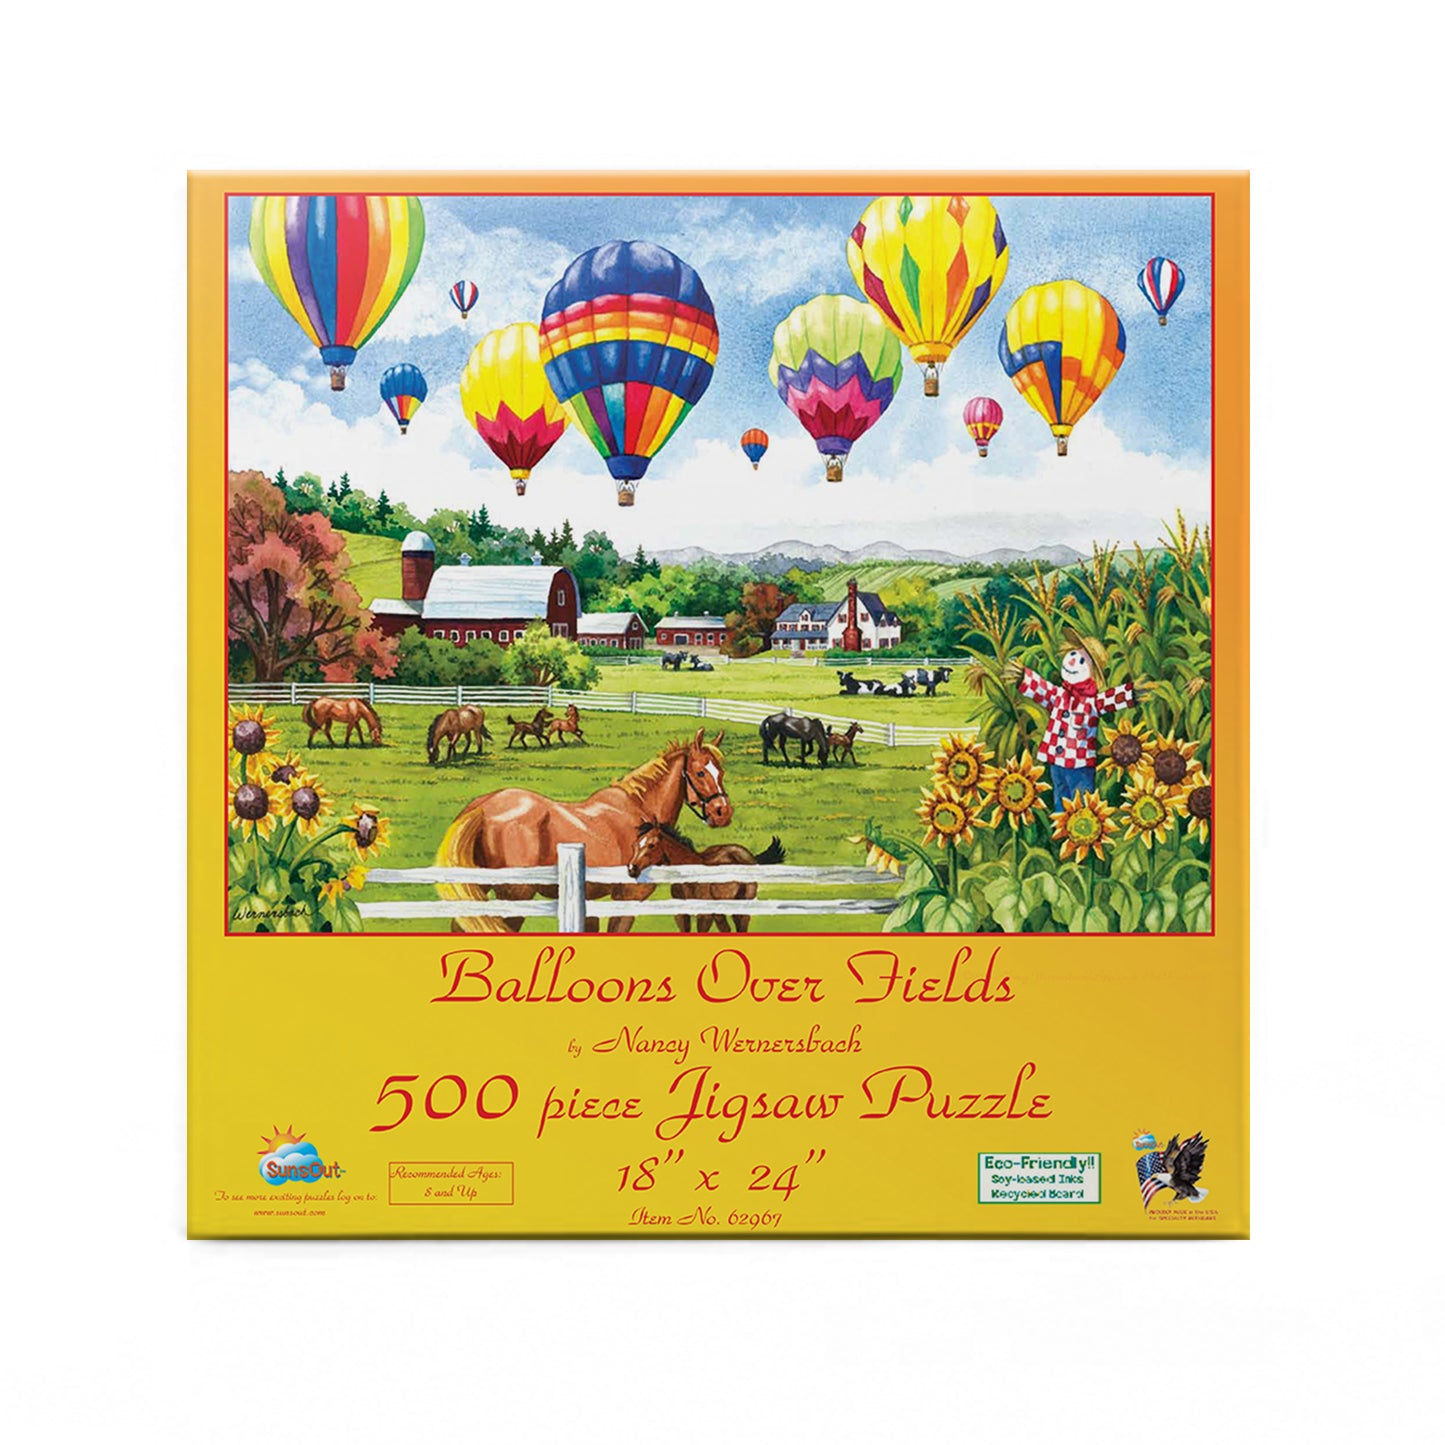 Balloons Over Fields - 500 Piece Jigsaw Puzzle